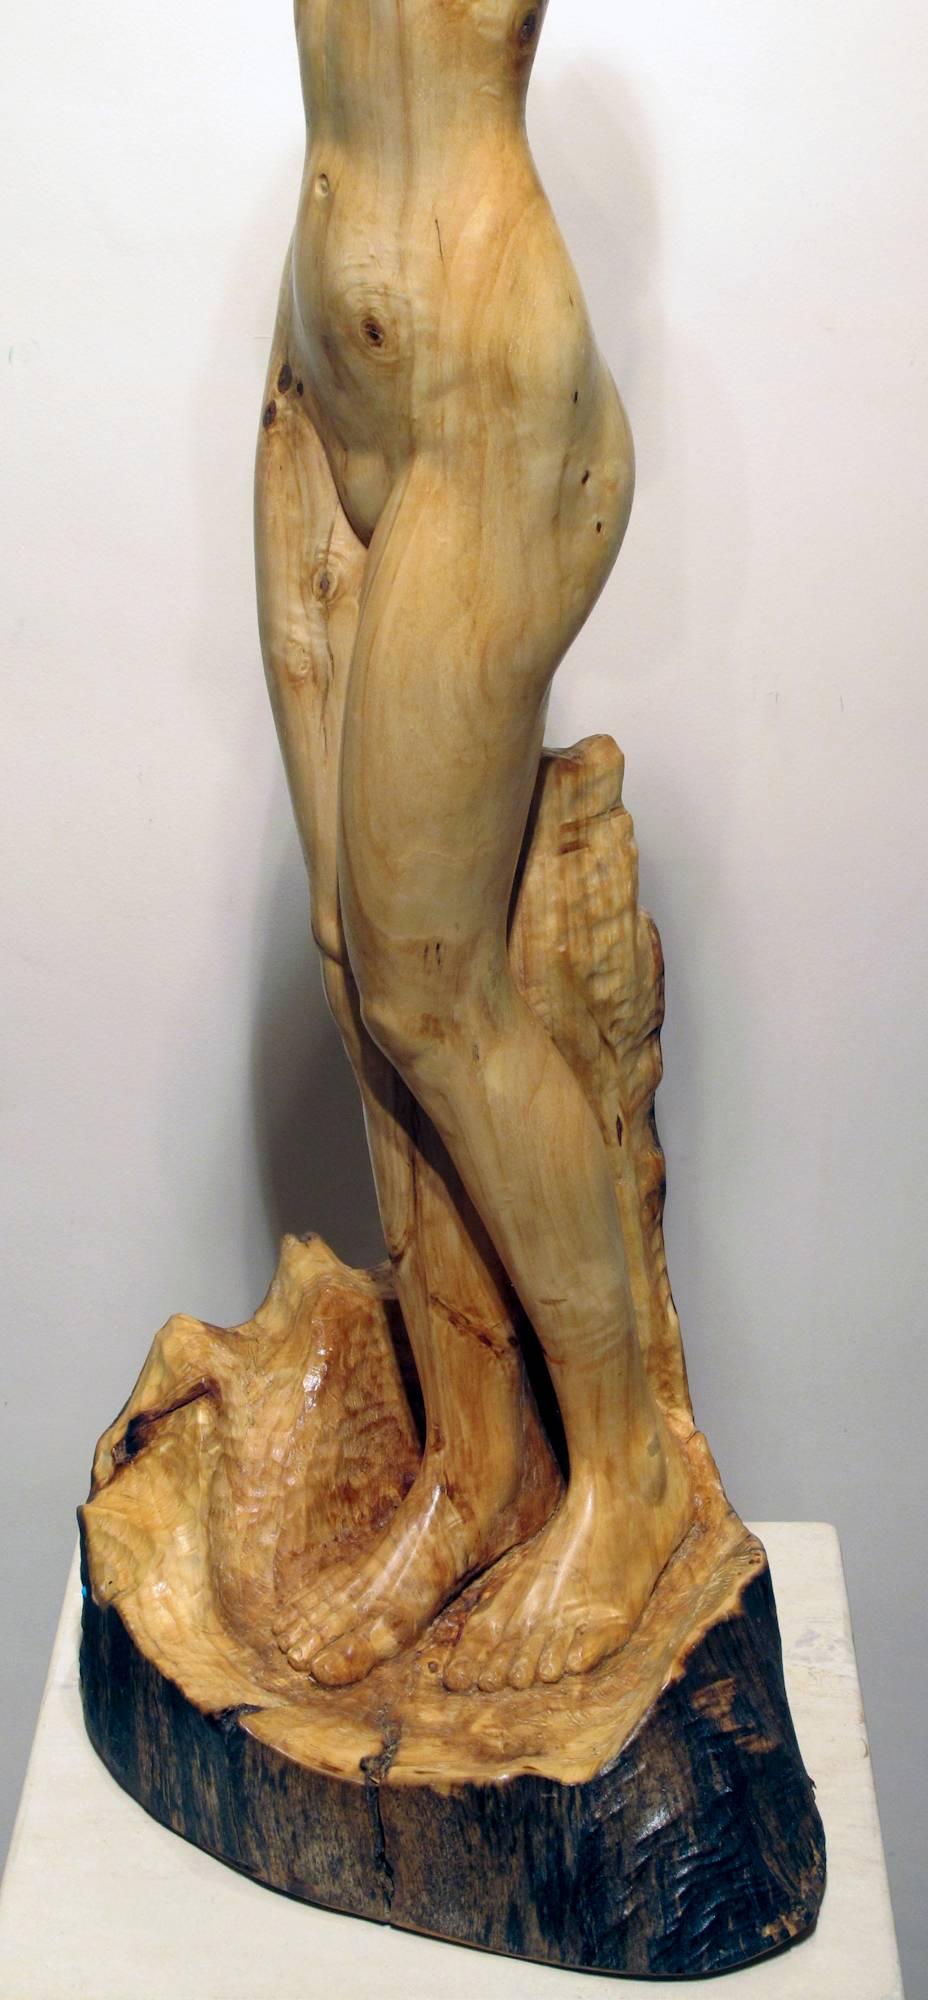 Tree Athena by Troy Williams female nude blonde wood sculpture Santa Fe artist

Sculptor Troy Williams unites the timeless and the contemporary in sculptures of rare beauty and meaning Beyond all the narrative potential of the three obvious physical